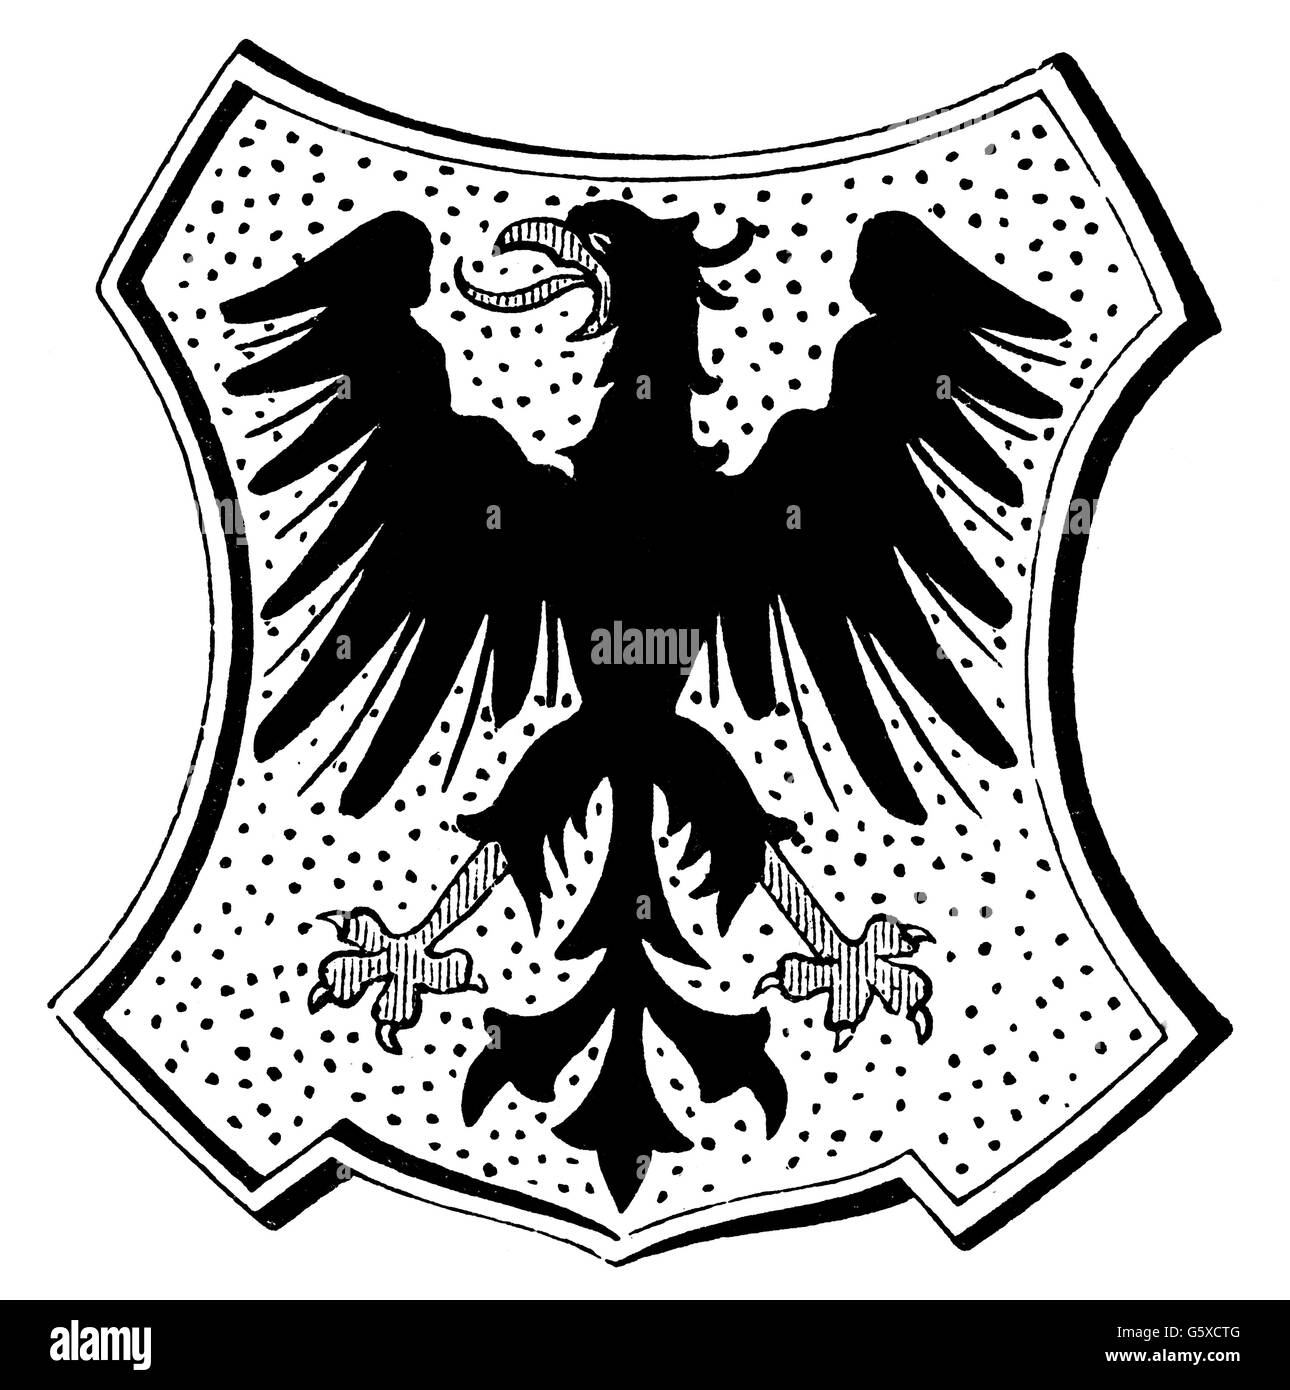 heraldry, coat of arms, Germany, city arms, Aachen, wood engraving, 2nd half 19th century, eagle, eagles, heraldic animal, heraldic animals, North Rhine-Westphalia, North-Rhine, Rhine, Westphalia, Nordrhein-Westfalen, Nordrhein-Westphalen, German Empire, Imperial Era, Kingdom of Prussia, Rhine Province, Central Europe, historic, historical, Additional-Rights-Clearences-Not Available Stock Photo